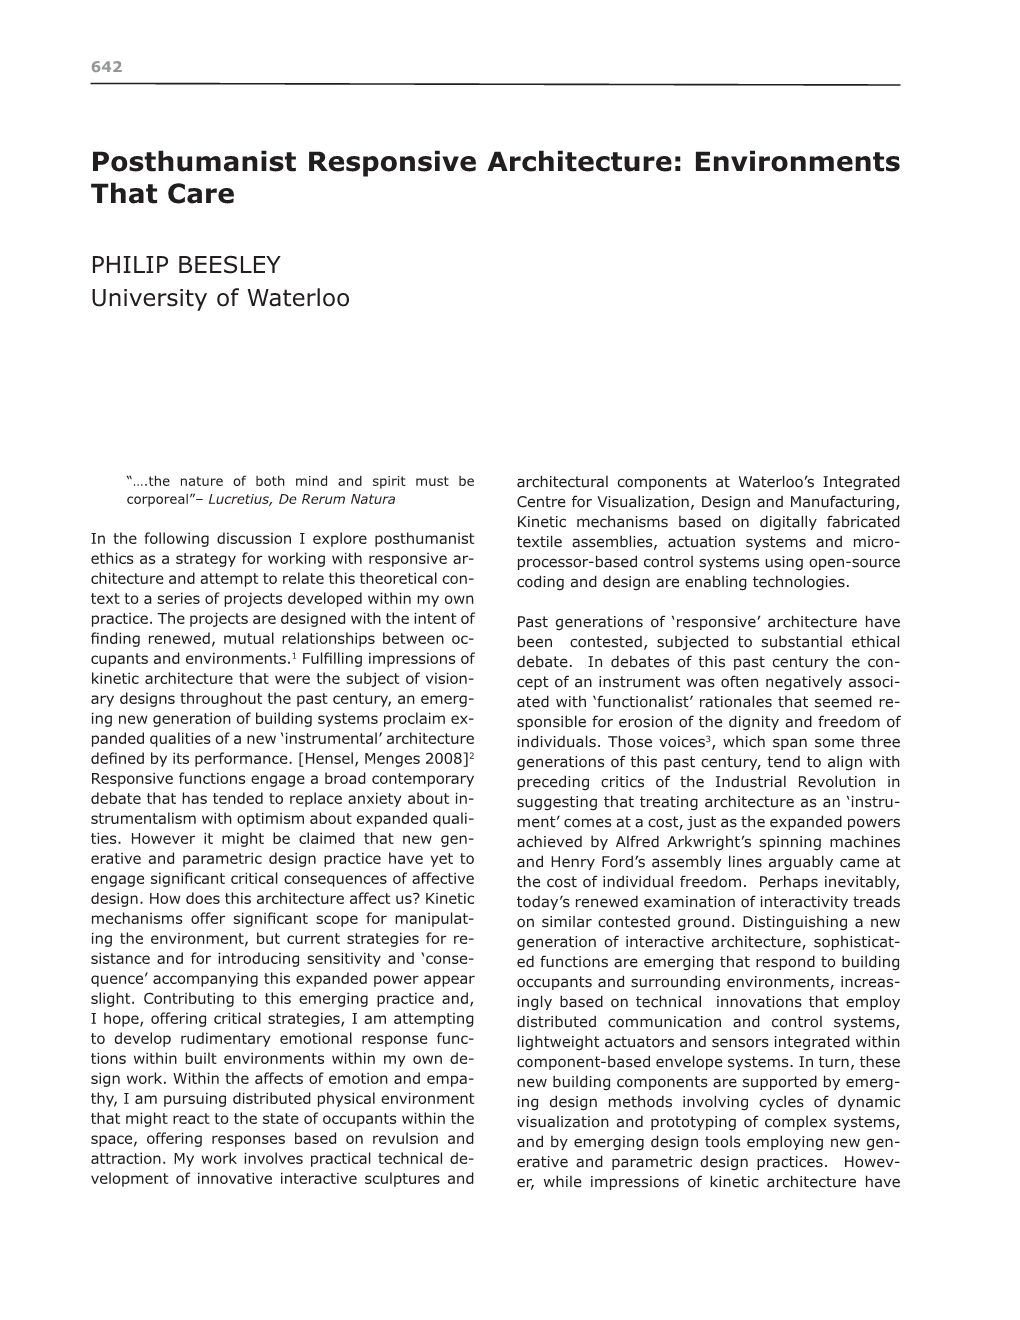 Posthumanist Responsive Architecture: Environments That Care